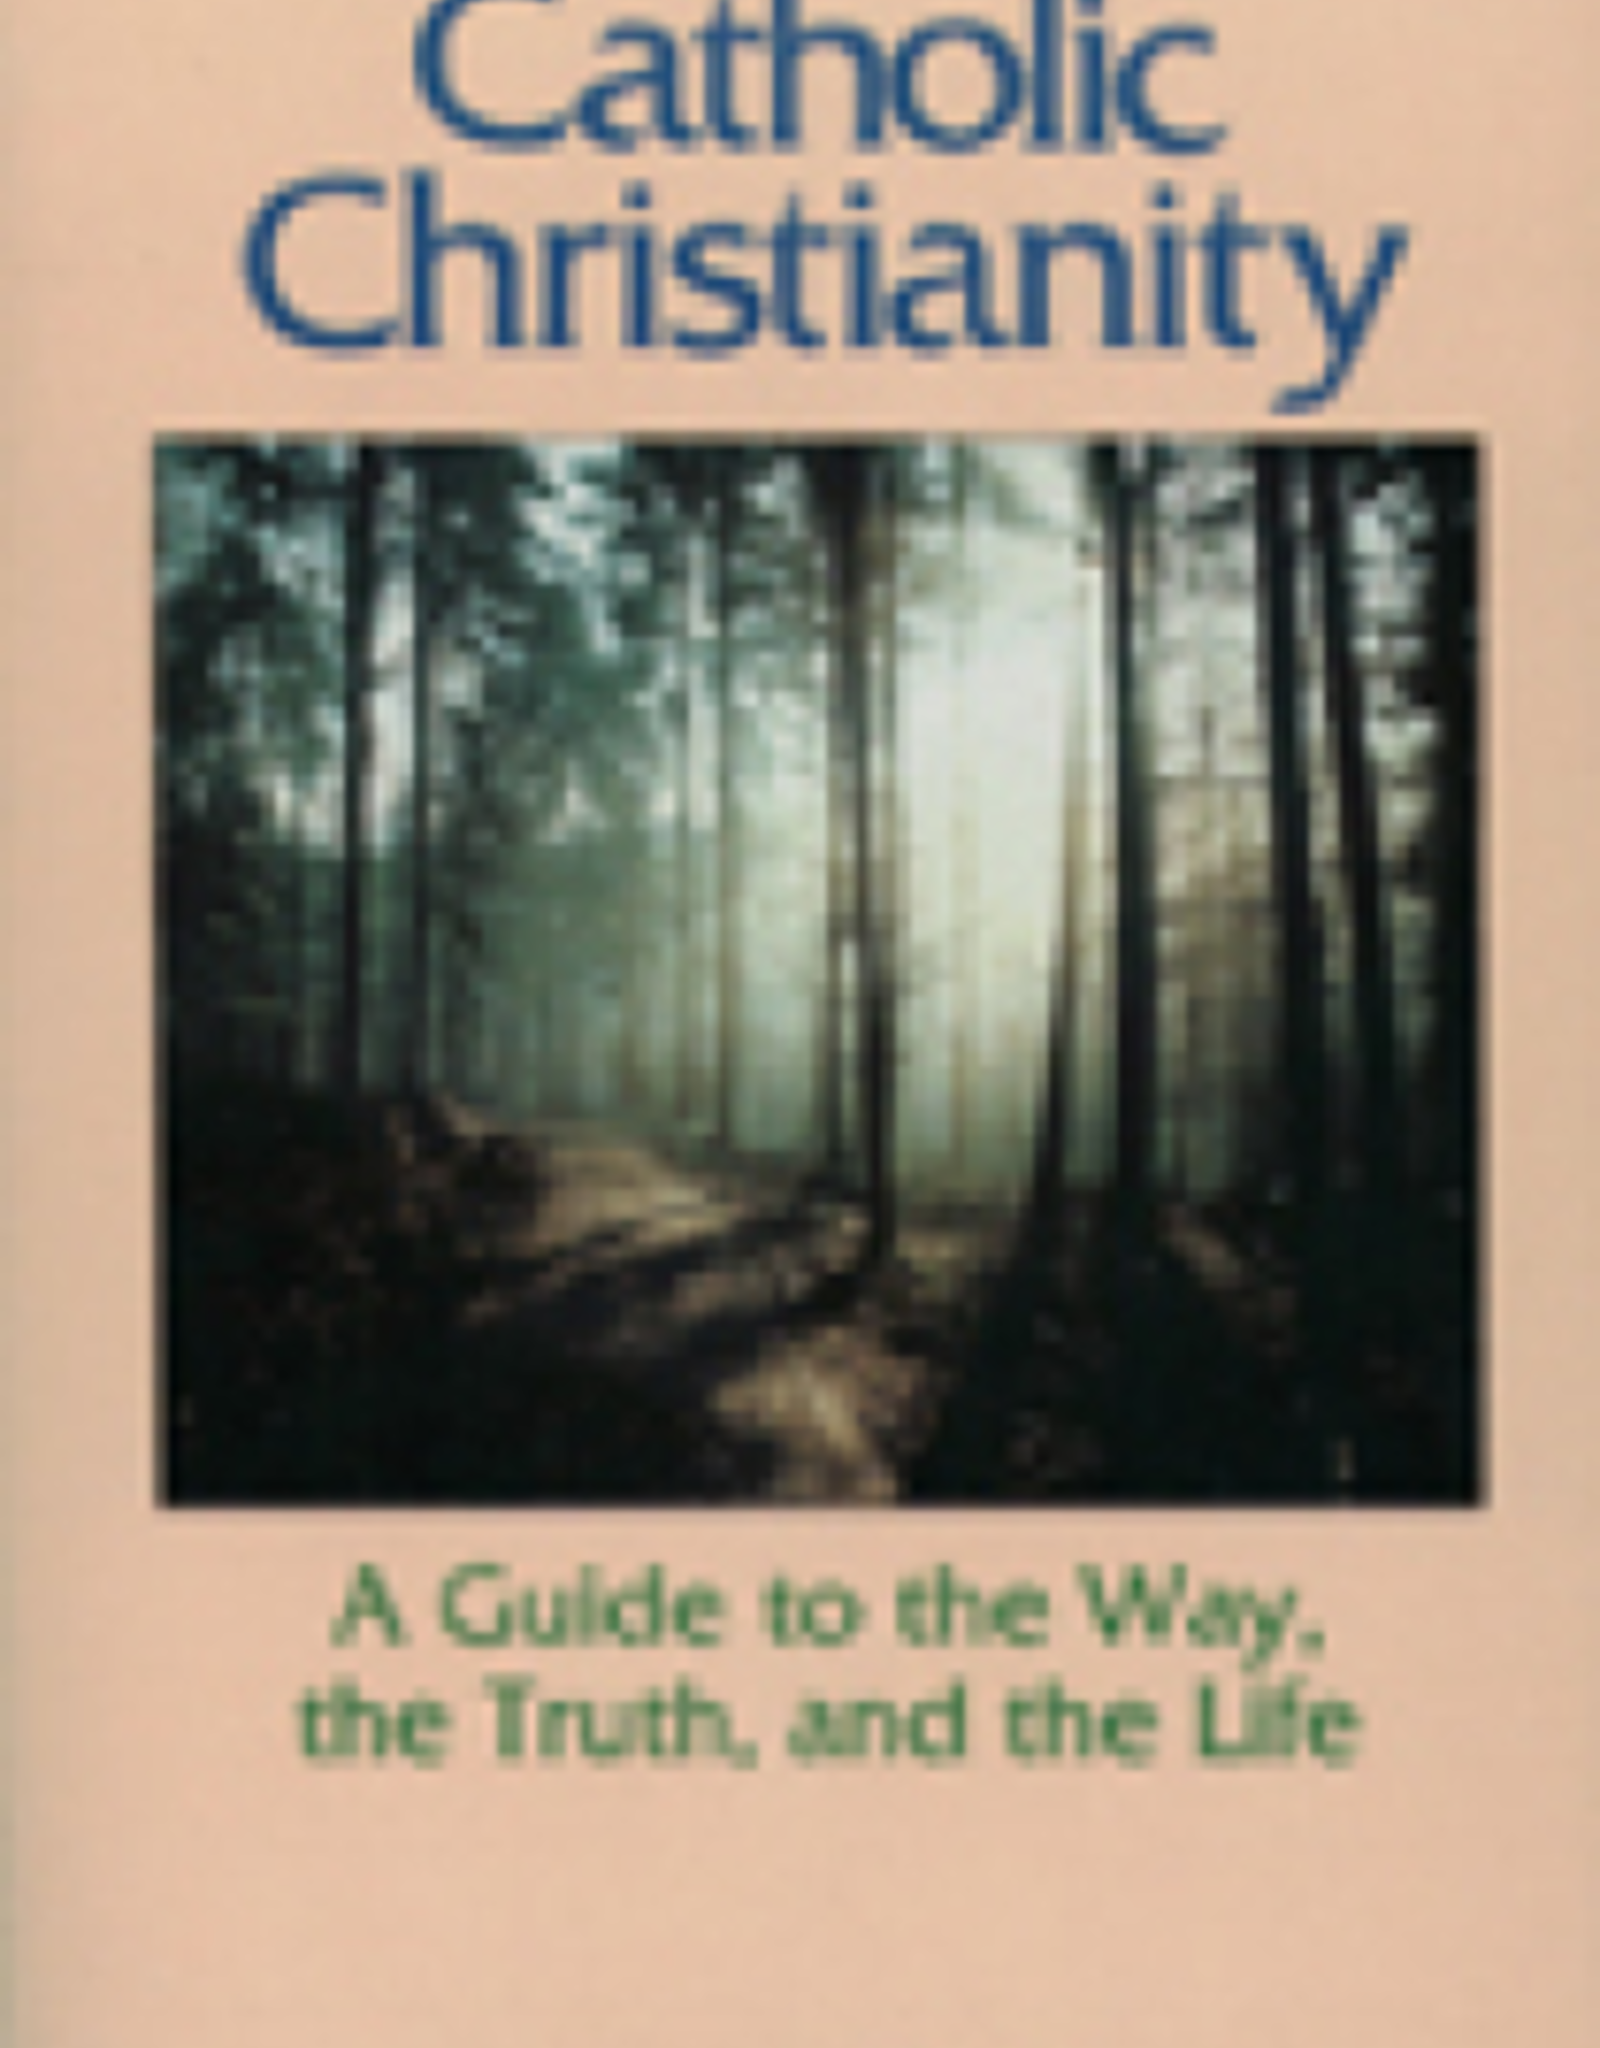 Paulist Press Catholic Christianity:   A Guide to the Way, the Truth, and the Life, by Richard Chilson (paperback)